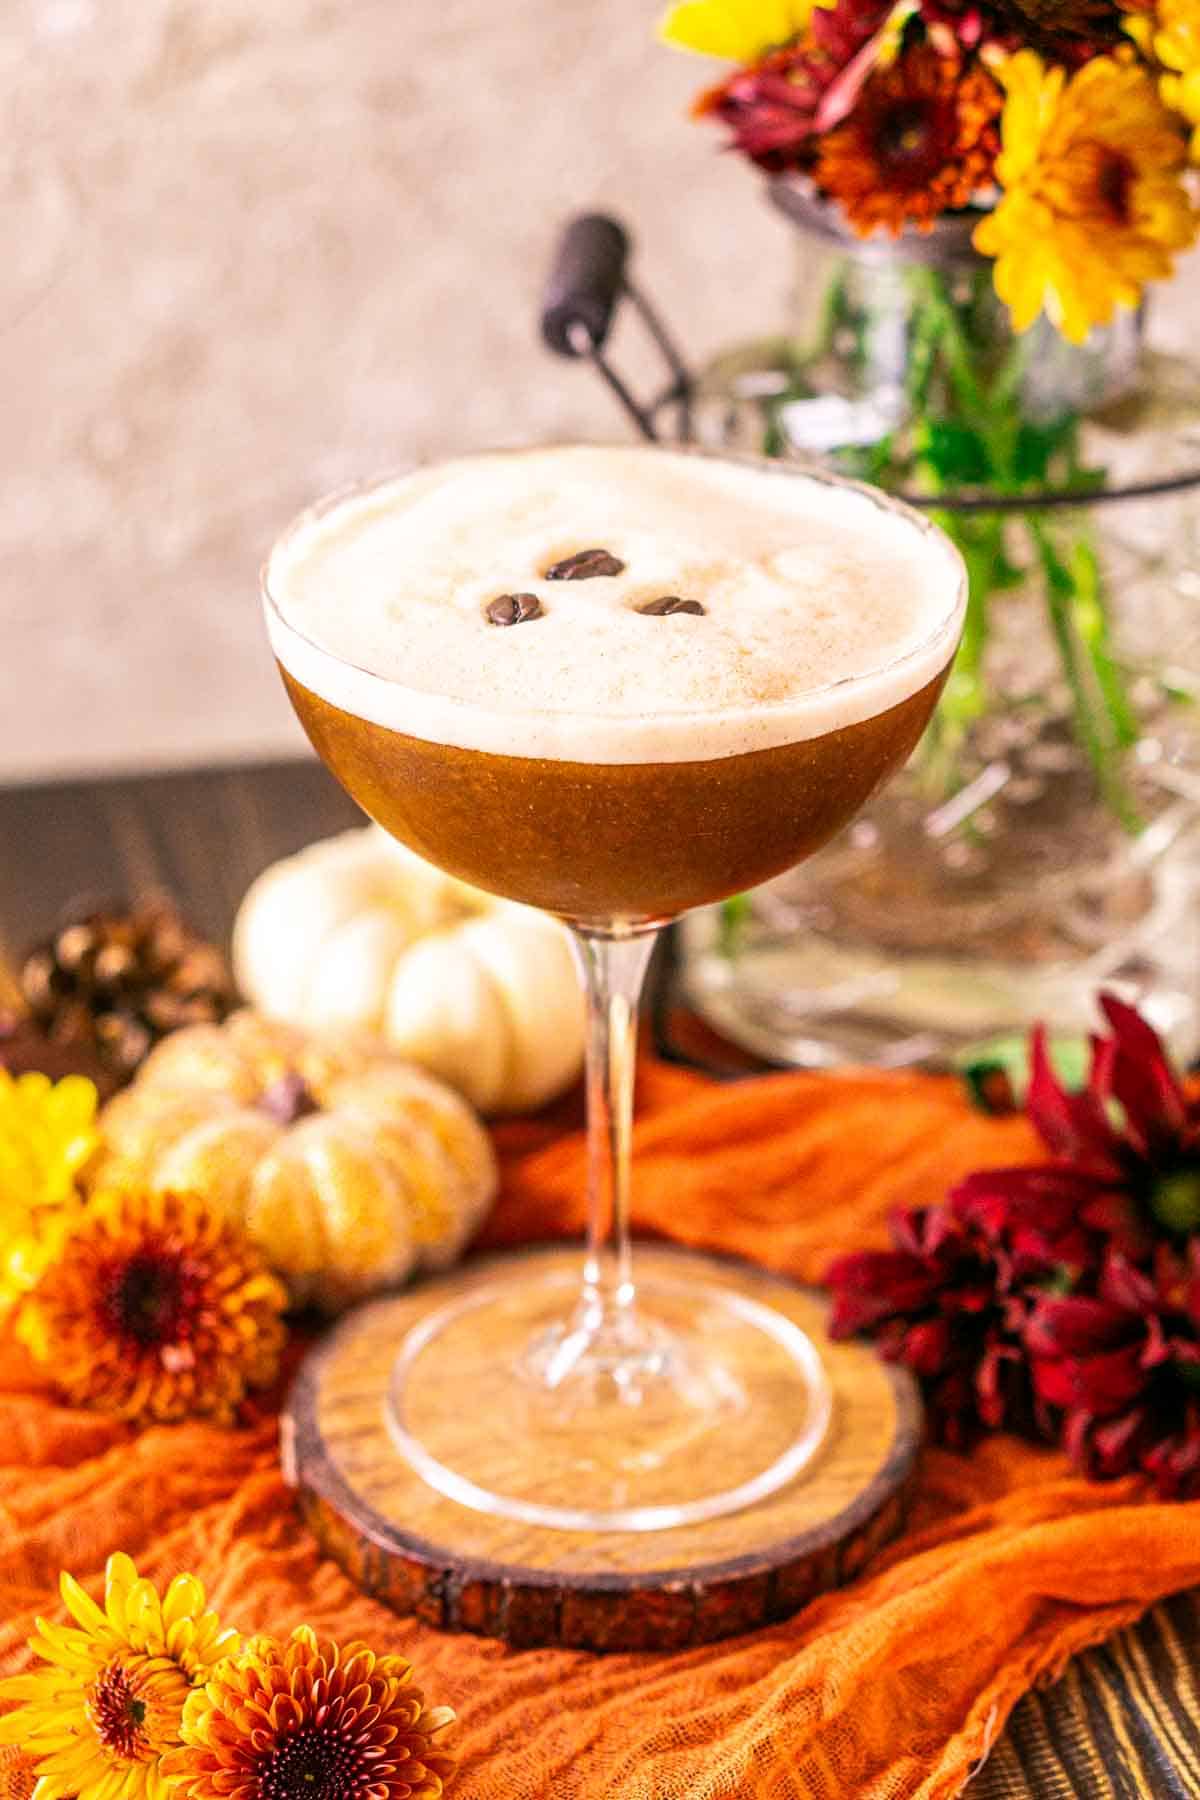 A close-up view of the pumpkin spice espresso martini on a wooden coaster with orange cloth underneath and colorful flowers around it.